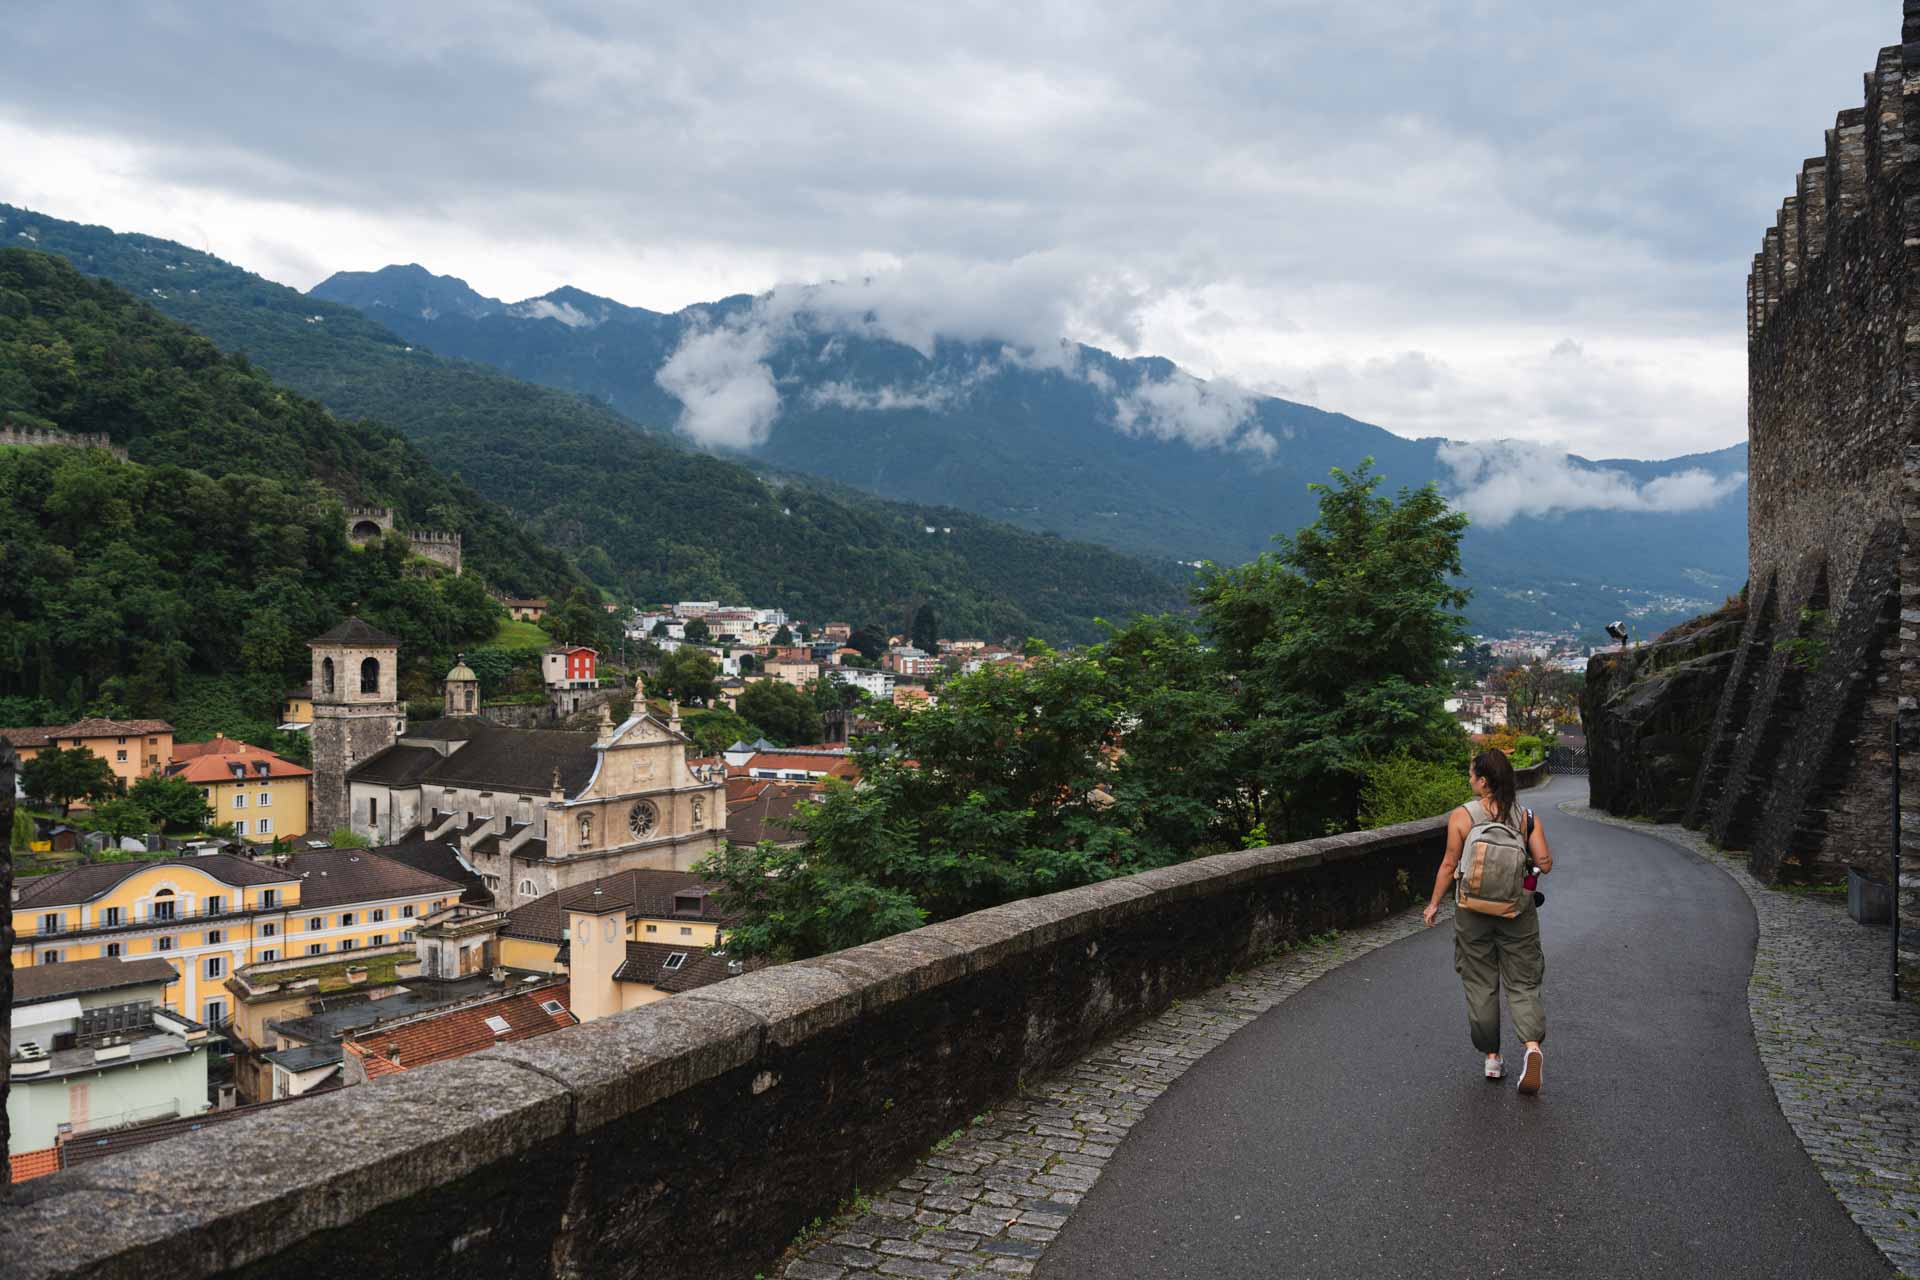 Sara walkng down the and old stone road leading from Castle Grande to Bellinzona town in Switzerland.